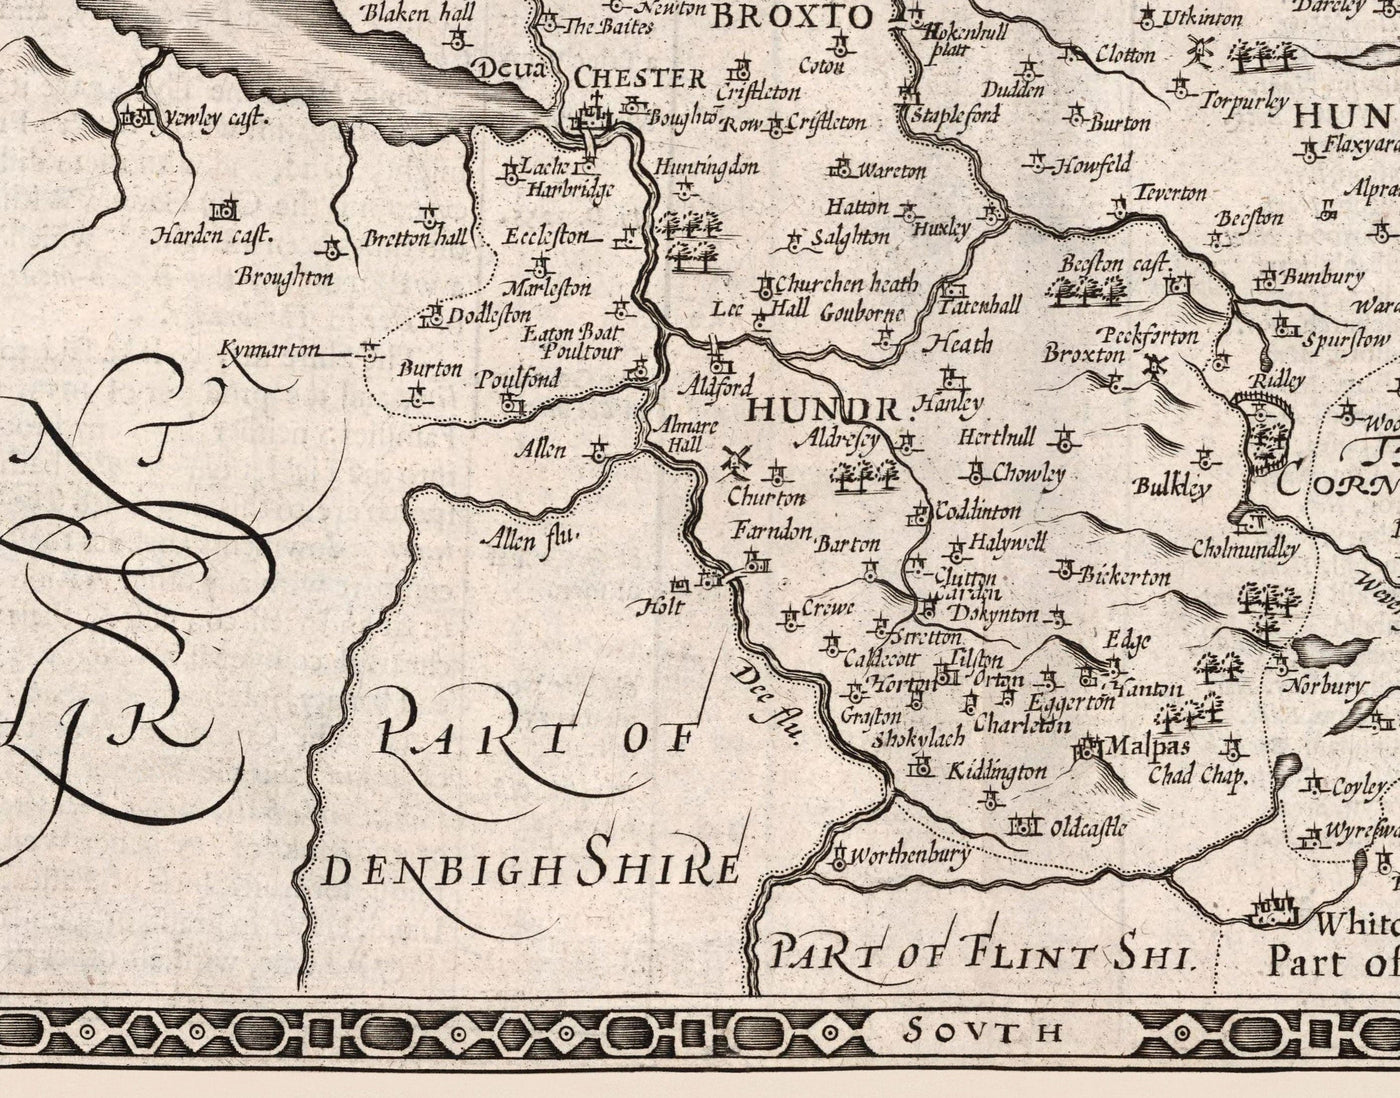 Old Monochrome Map of Cheshire in 1611 - Chester, Warrington, Crewe, Runcorn, Liverpool, Wirral, Merseyside